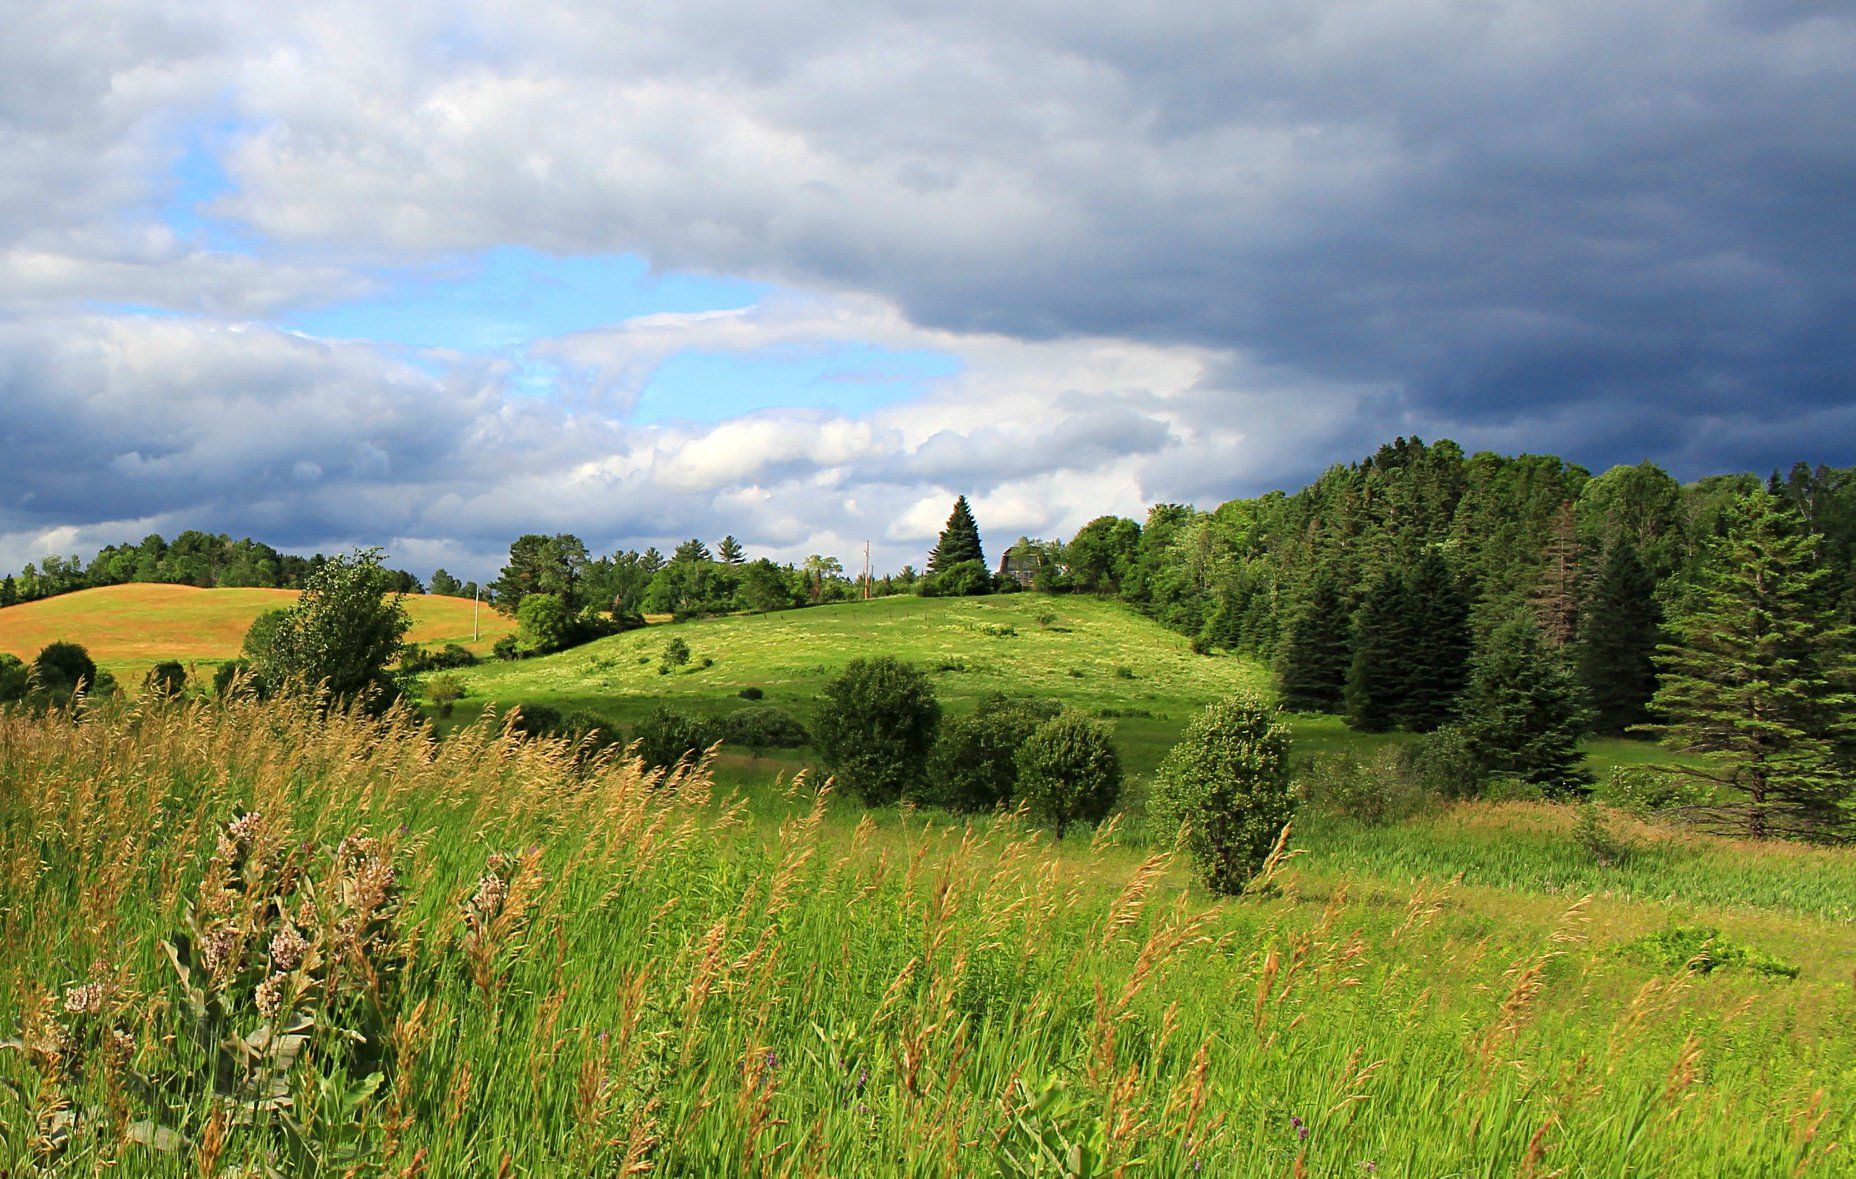 A view of the hills in Burke, Vermont with cloudy skies